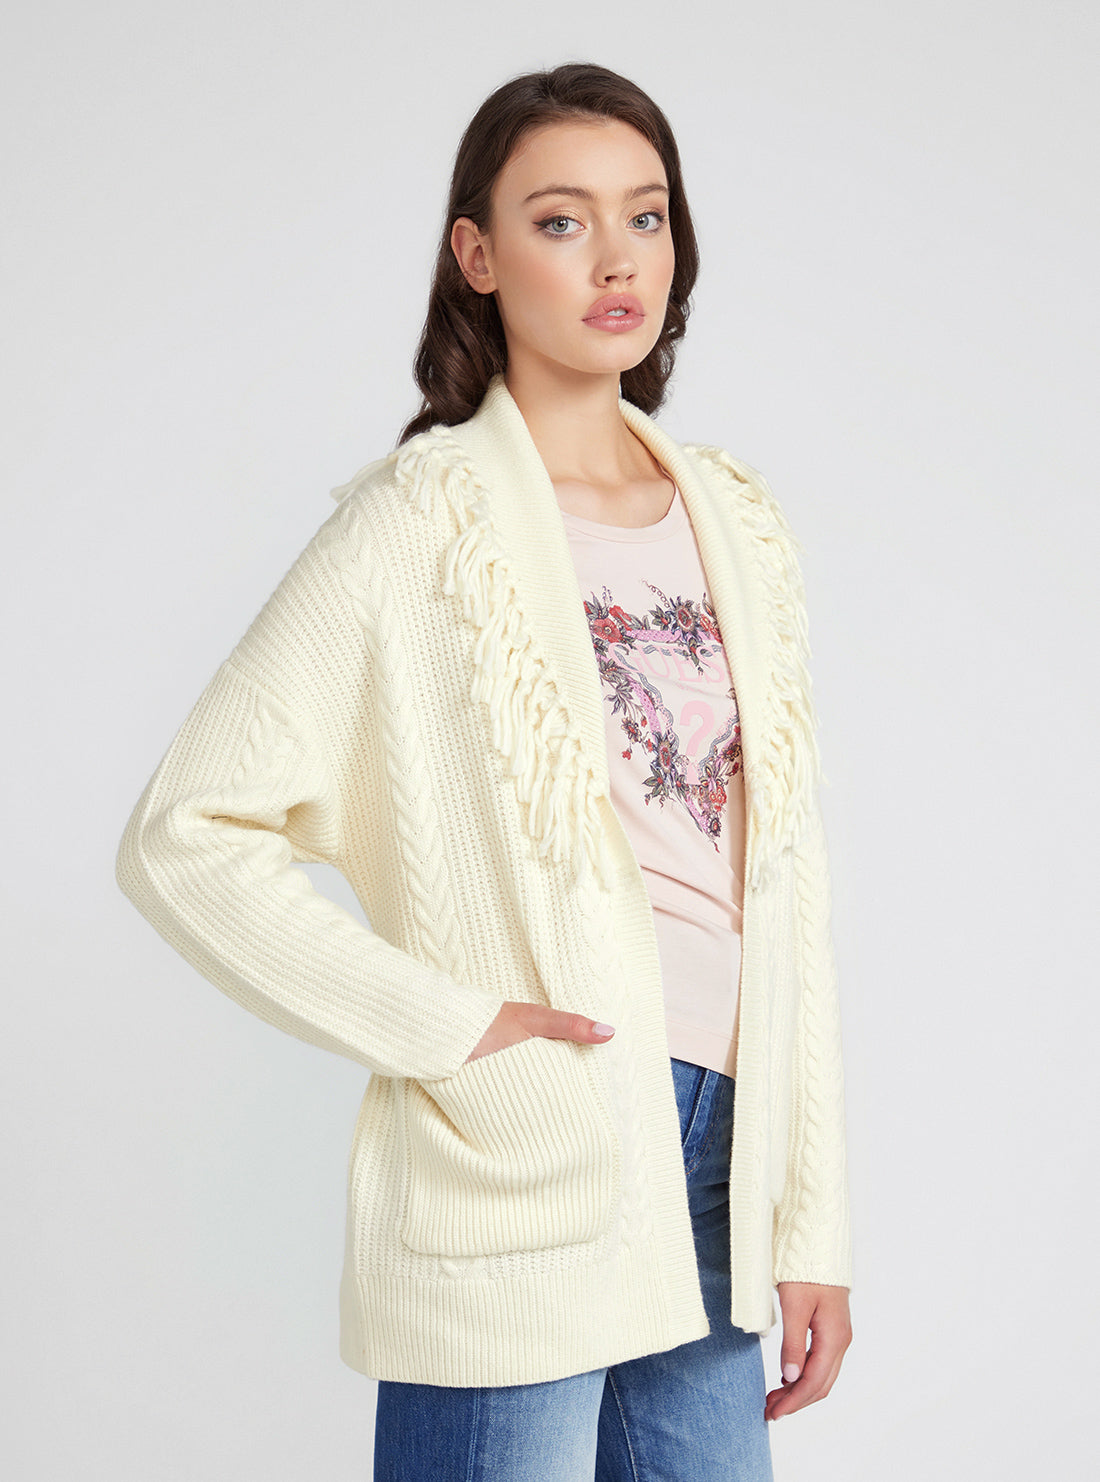 GUESS Cream White Long Sleeve Cardigan Sweater side view